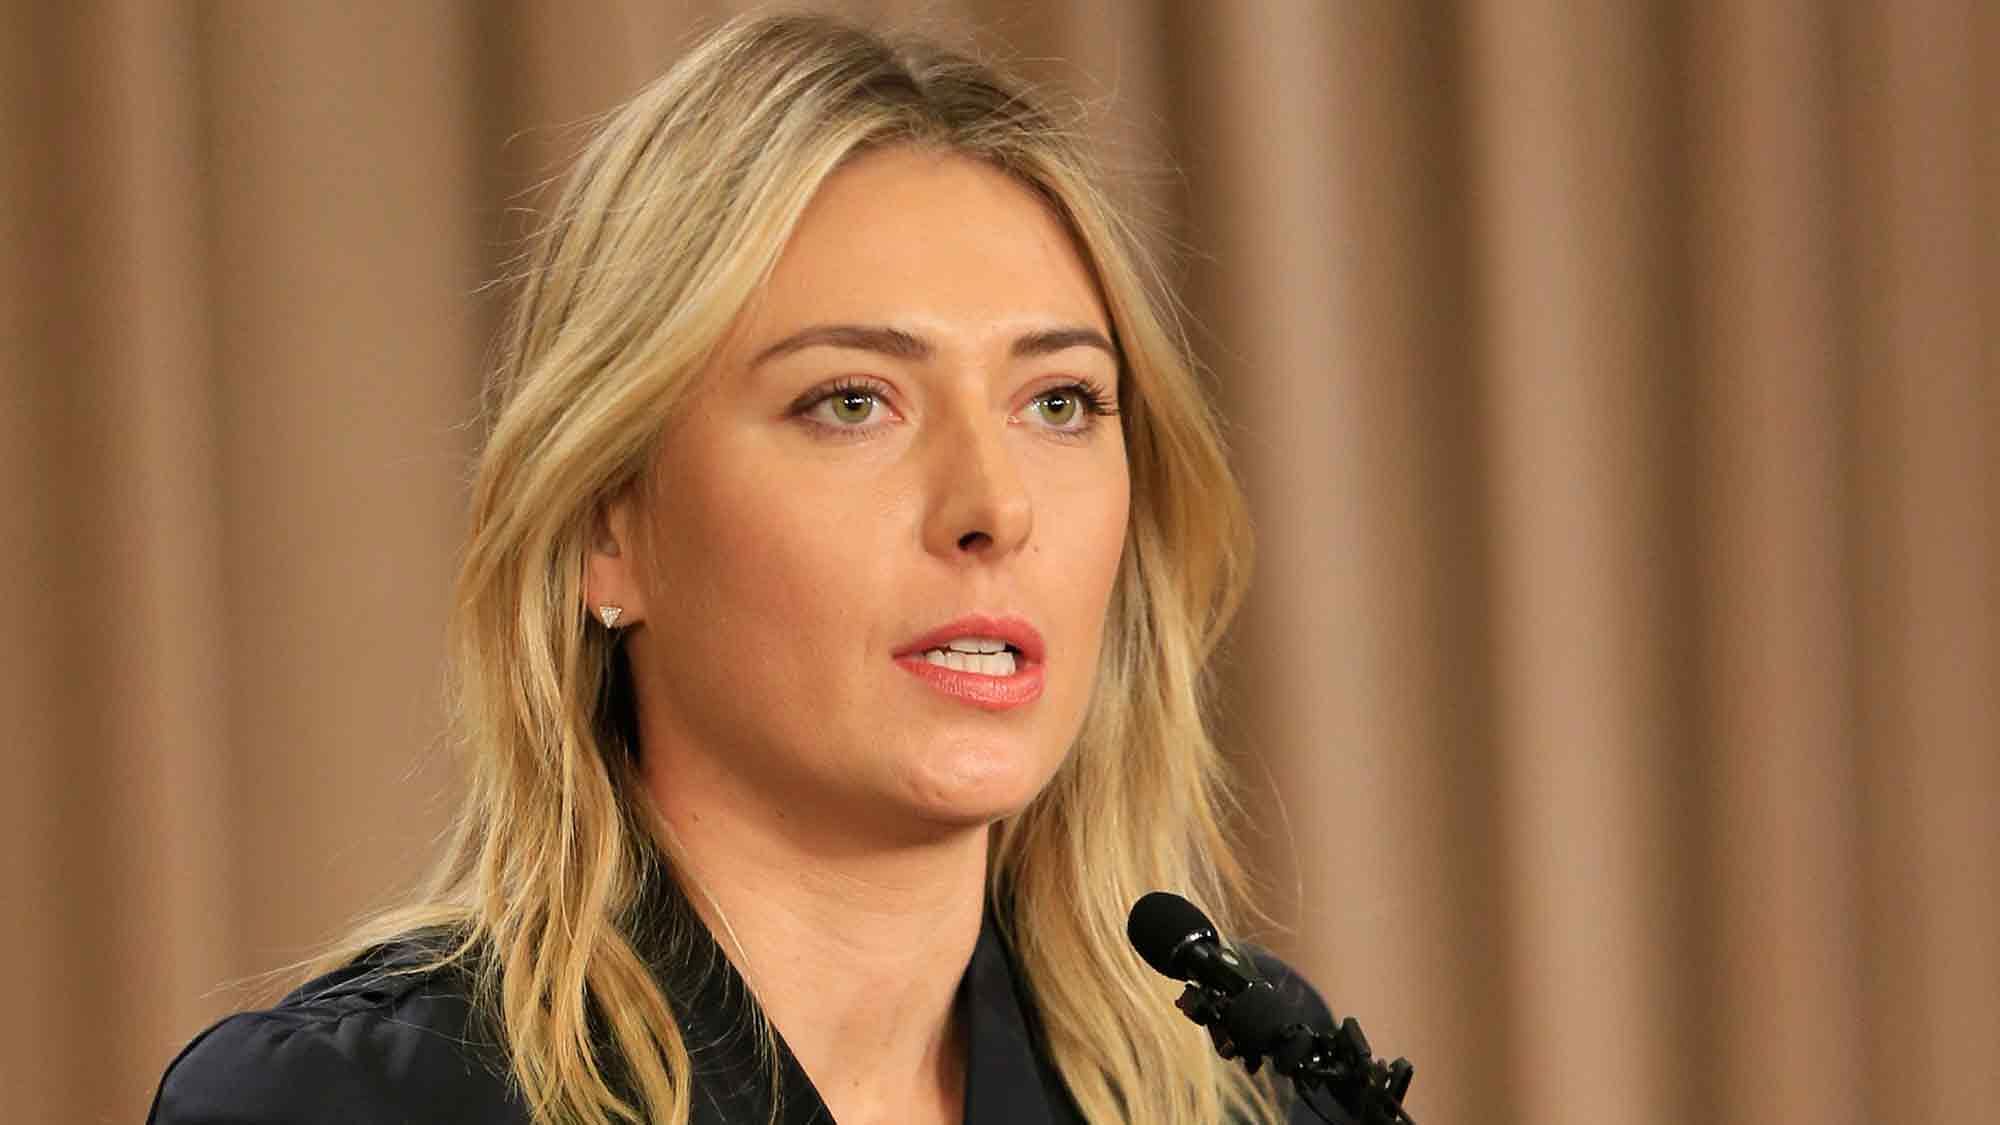 Maria Sharapova at the press conference in Los Angeles on Monday (Photo: AP)